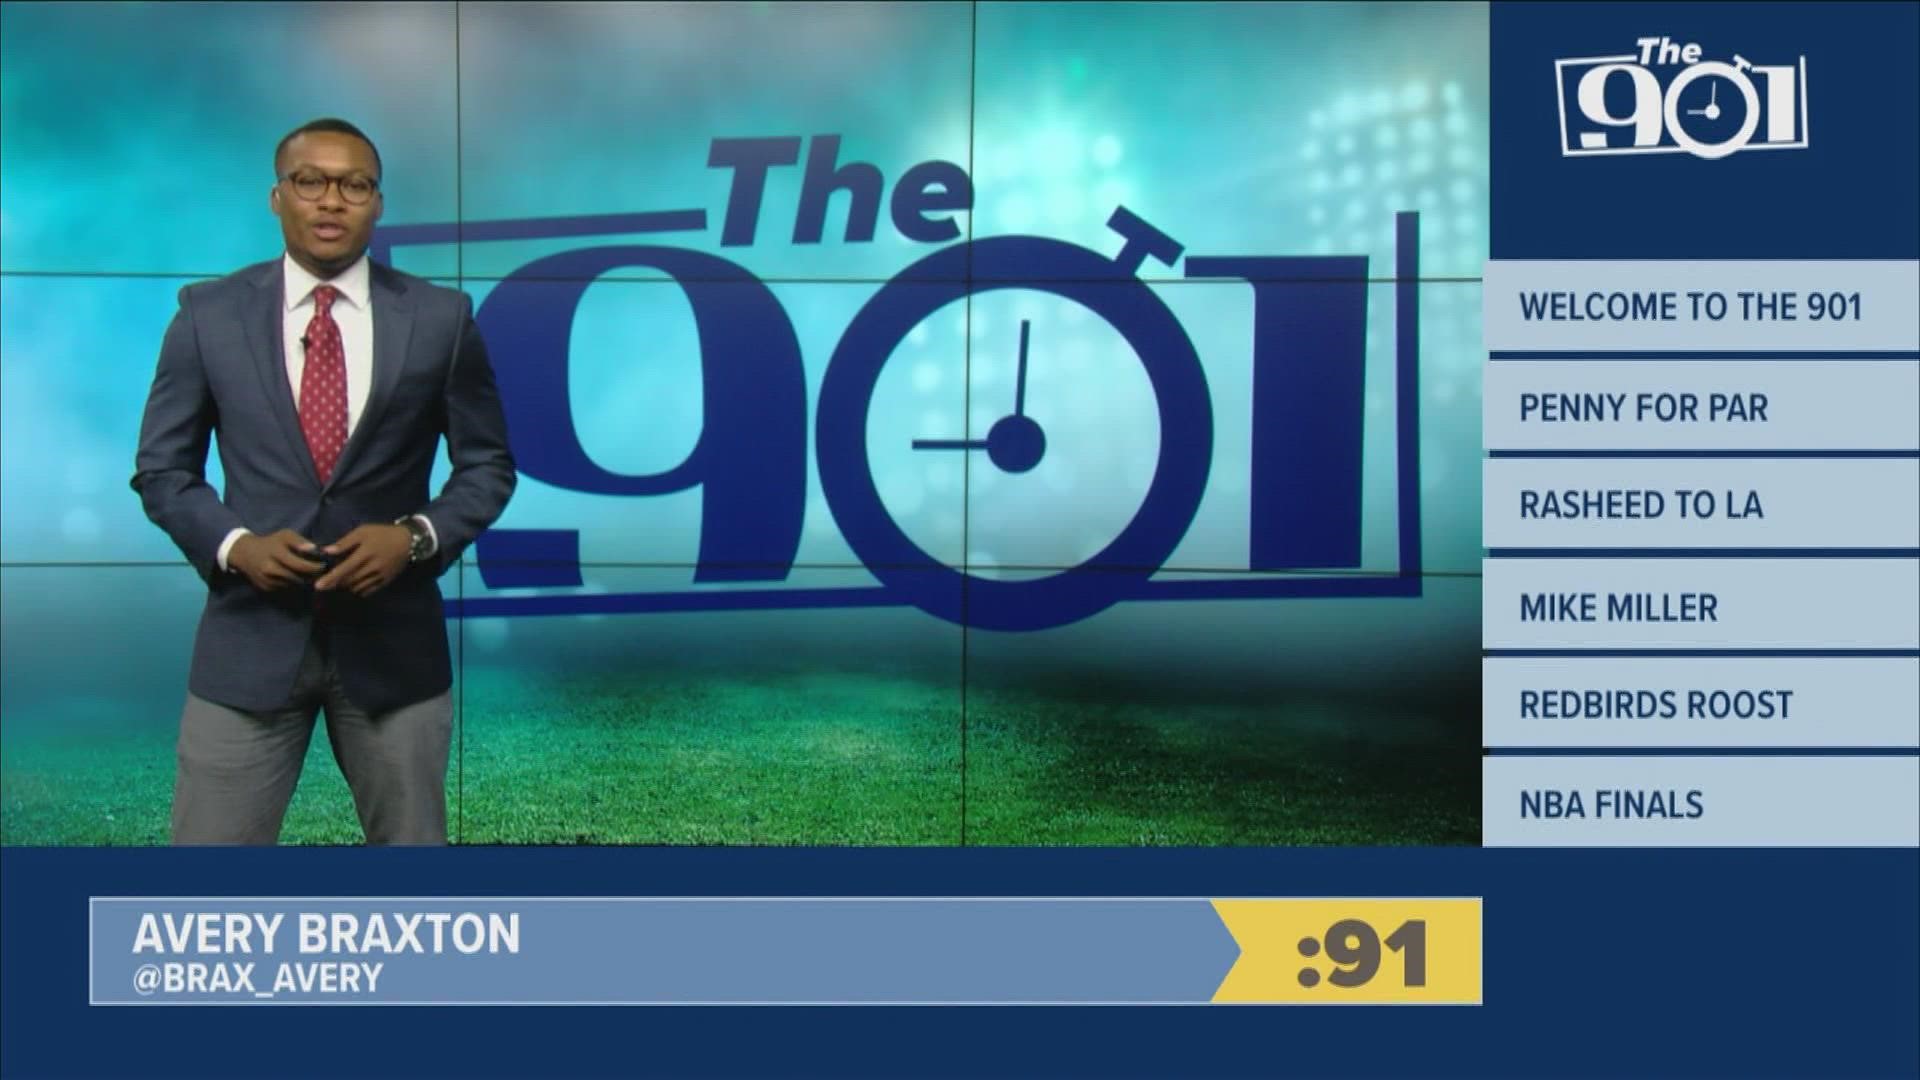 Avery Braxton gets you up to speed on everything Memphis sports in Monday's episode of The 901.